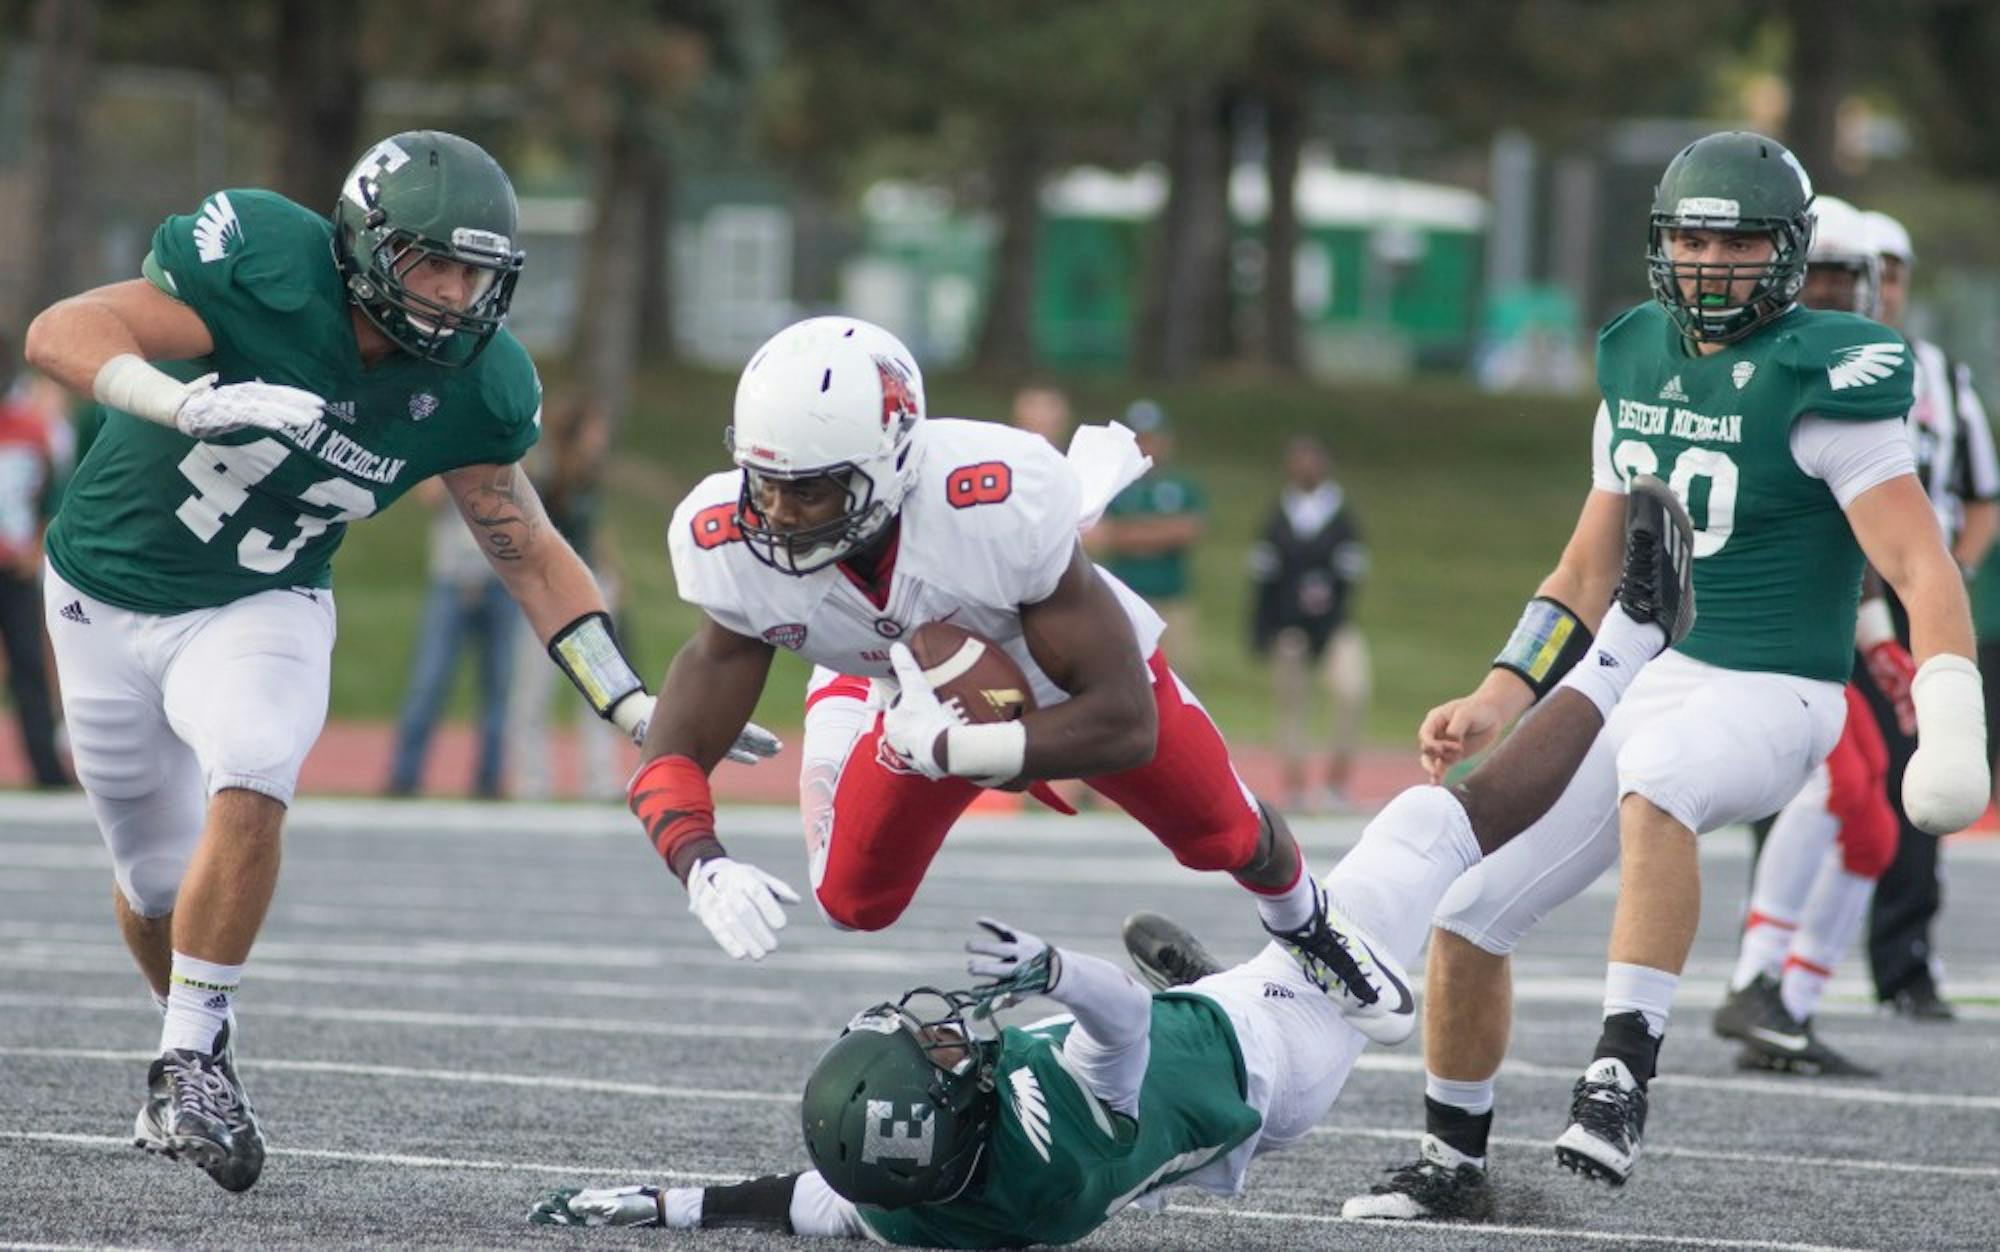 Ball State wide receiver Jordan Williams dives over an defender against Eastern Michigan Saturday afternoon in Ypsilanti, Mich. The Cardinals defeated the Eagles 28-17.